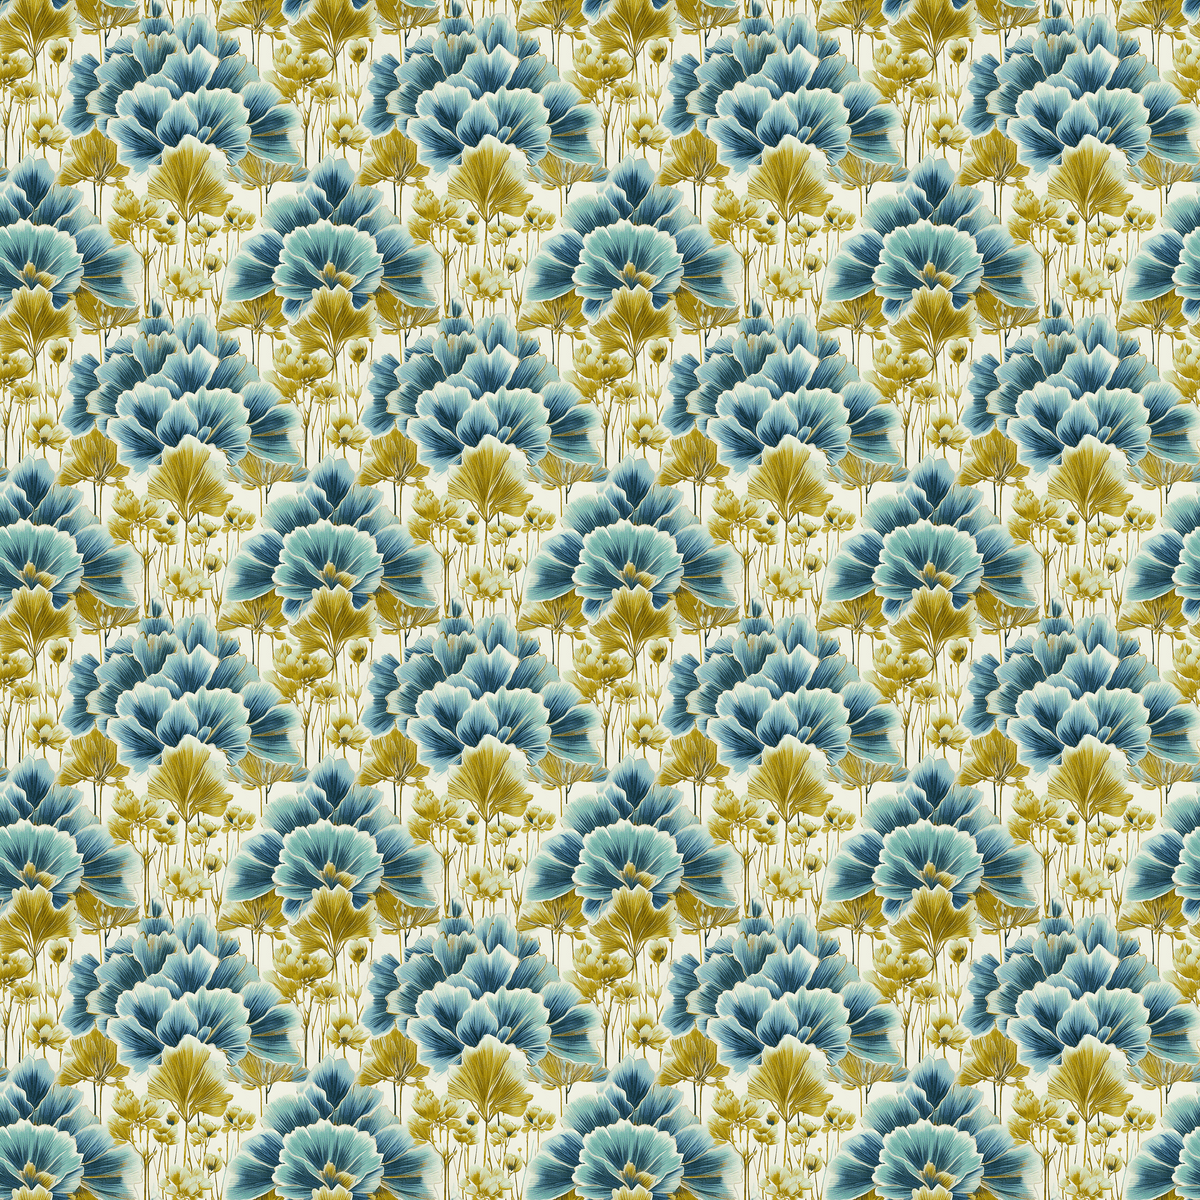 Bring Out The Best Teal Mustard Drapery Panel